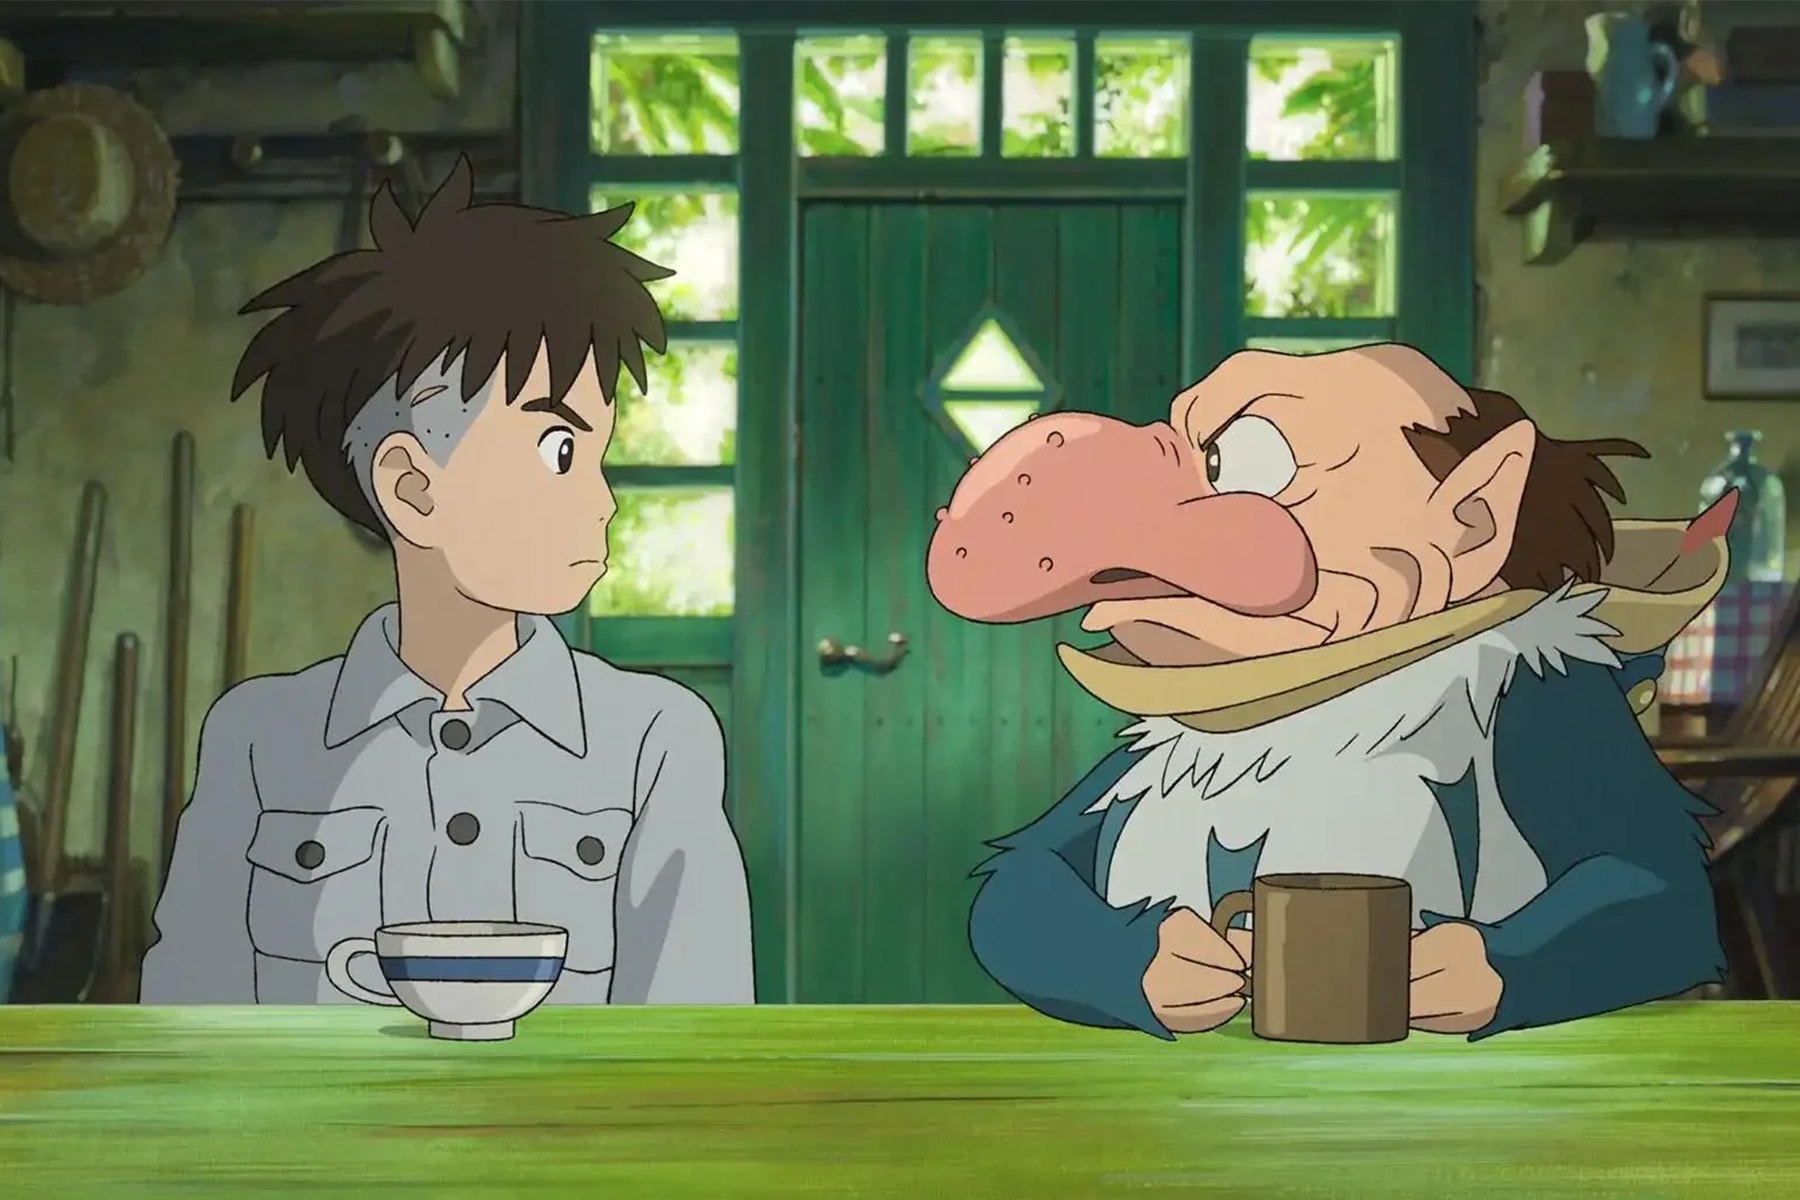 hayao-miyazaki-the-boy-and-the-heron-official-images